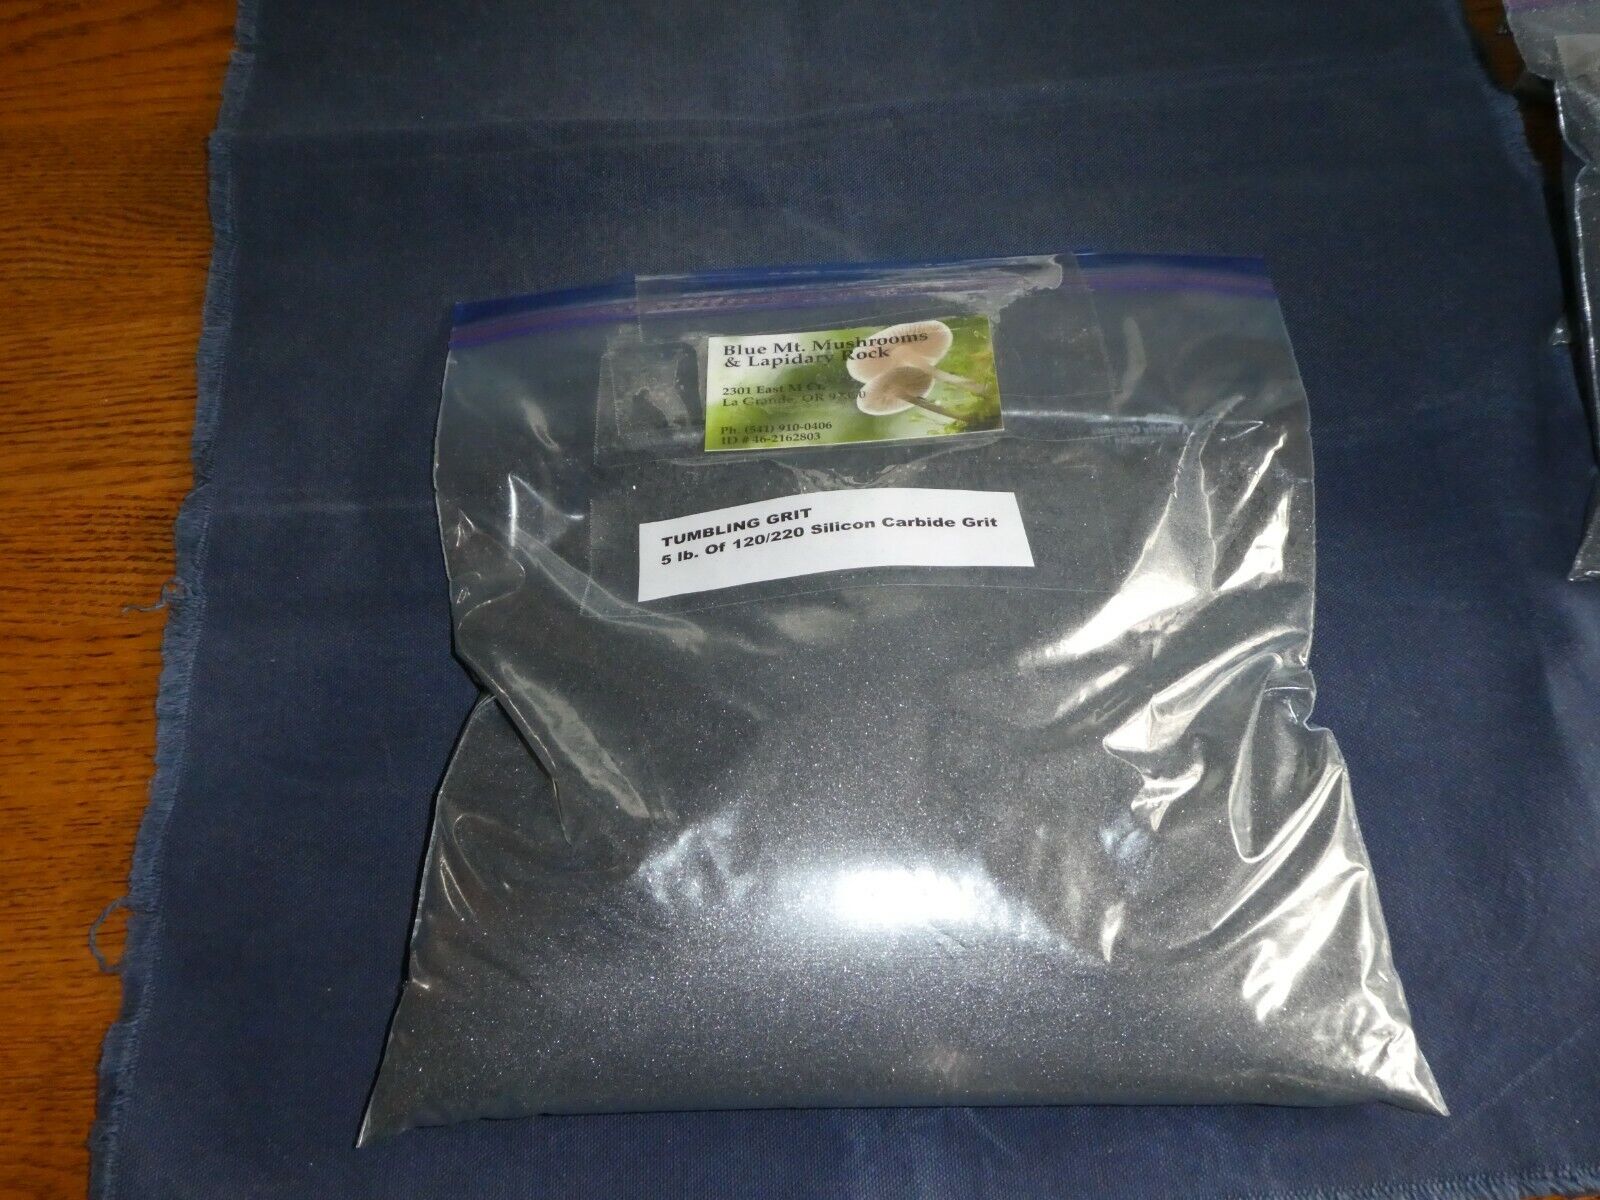 Rock Tumbling Grit -5 pounds of 120/220 Silicon Carbide